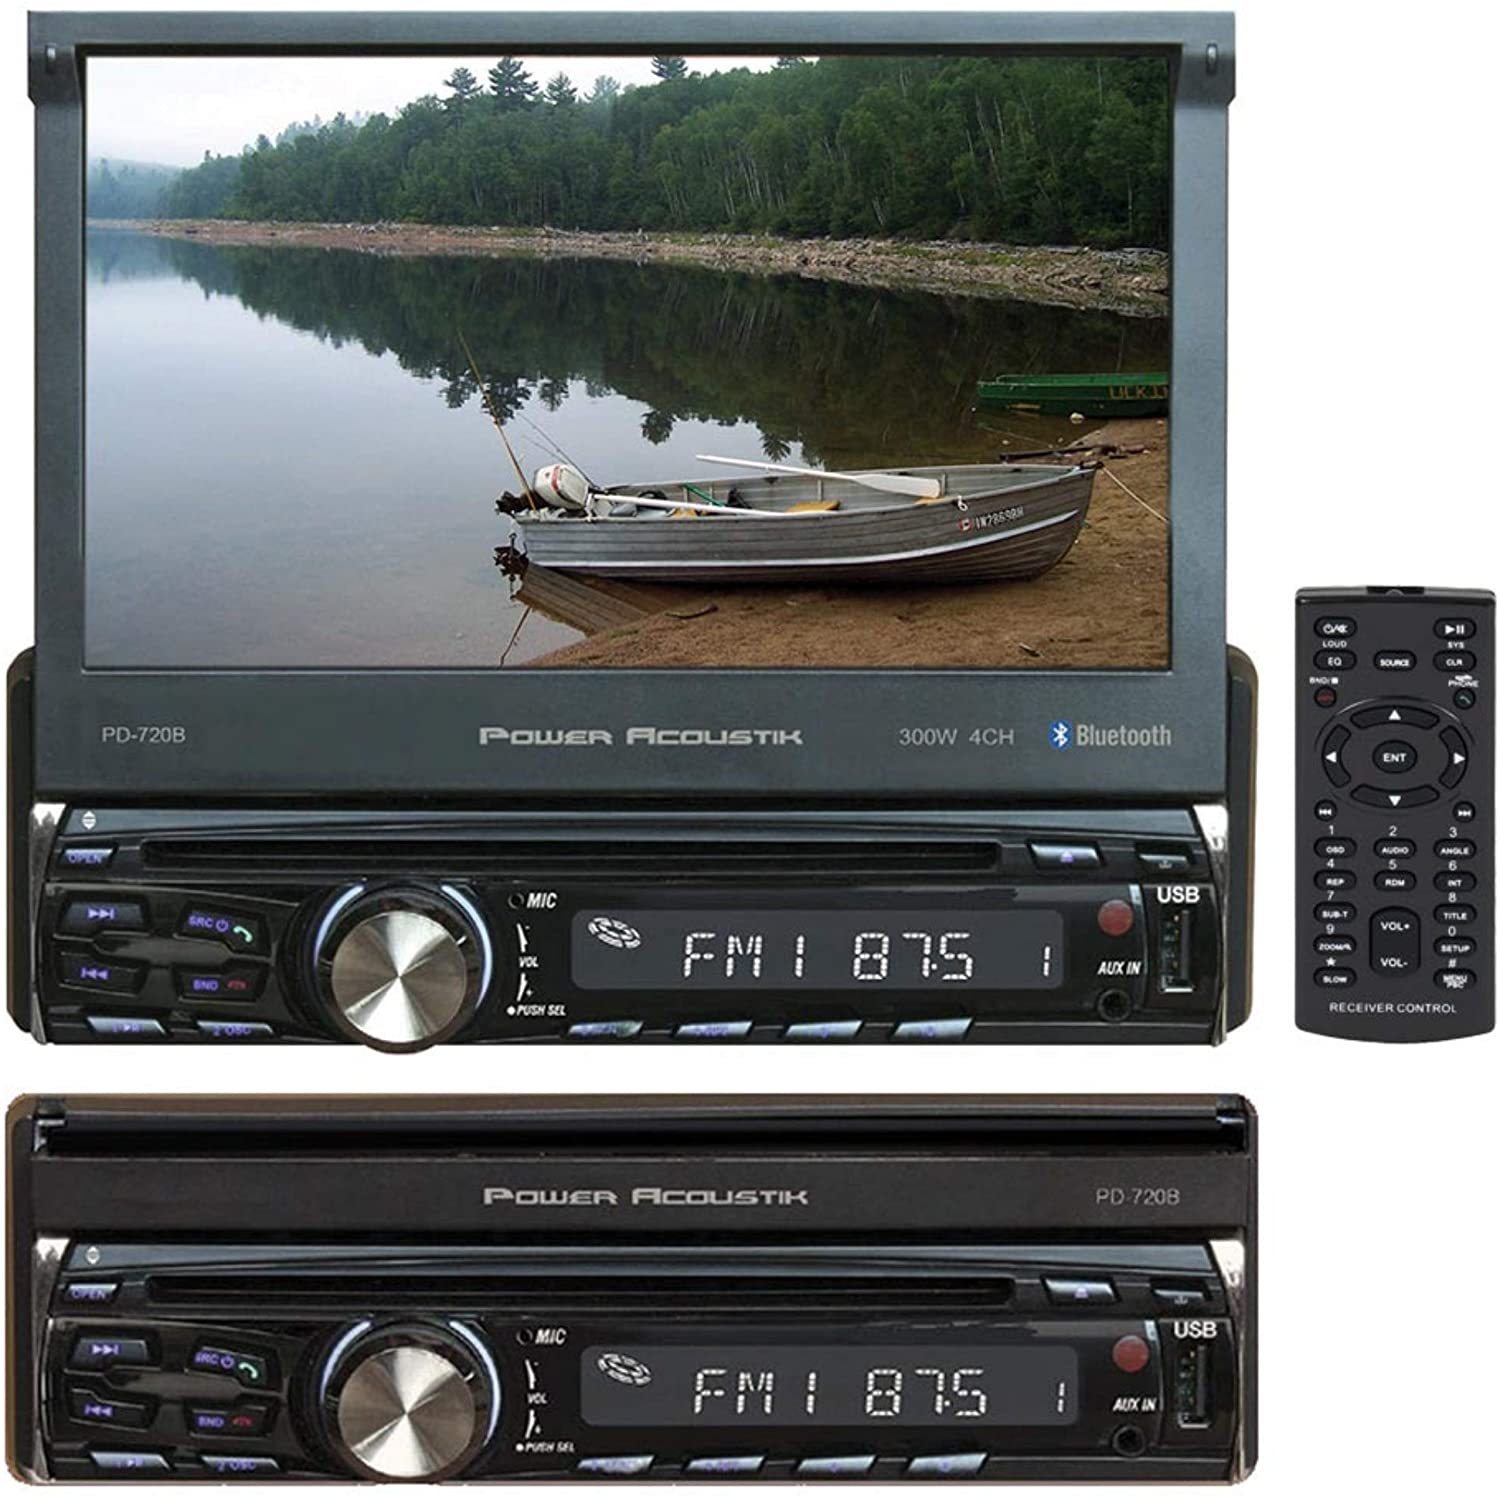 New Power Acoustik PD-720B 1-DIN with 7-inch LCD Touch. DVD, Car Stereo W/ BT